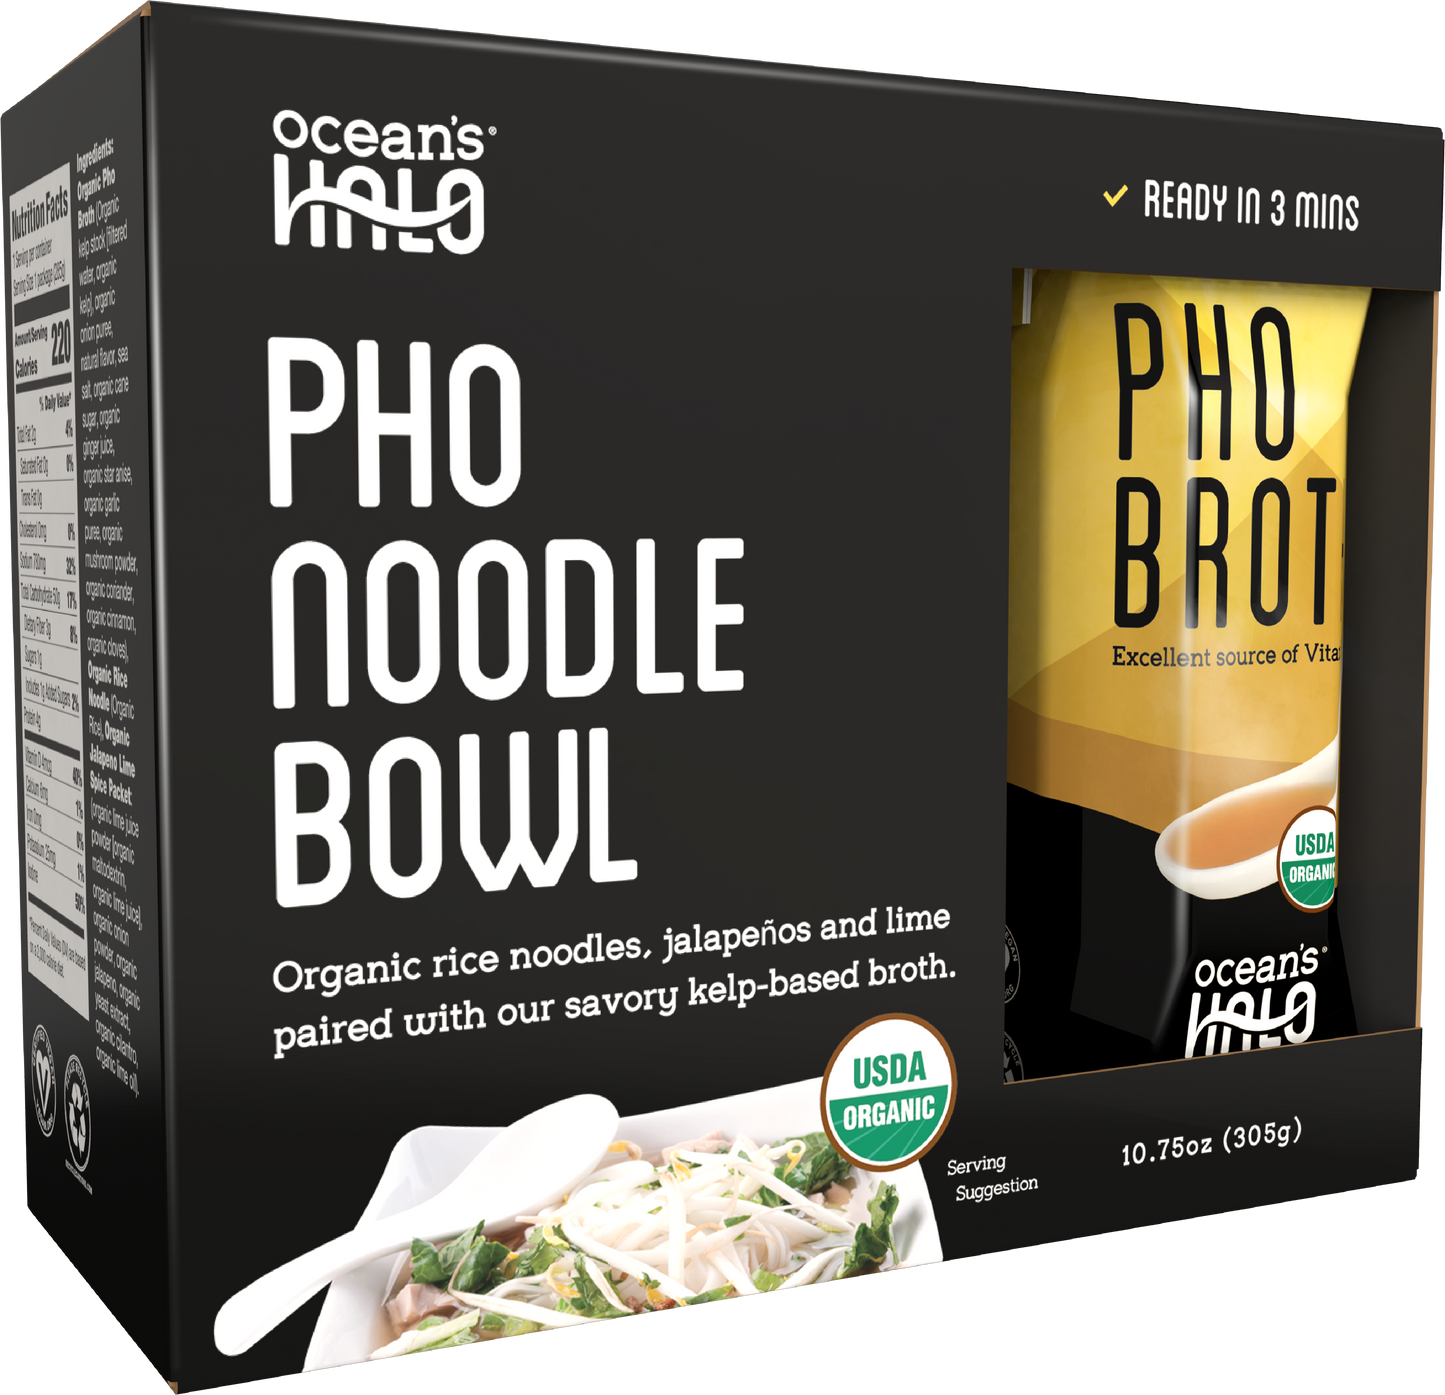 Organic and Vegan Gluten-free Instant Pho Noodle Bowl